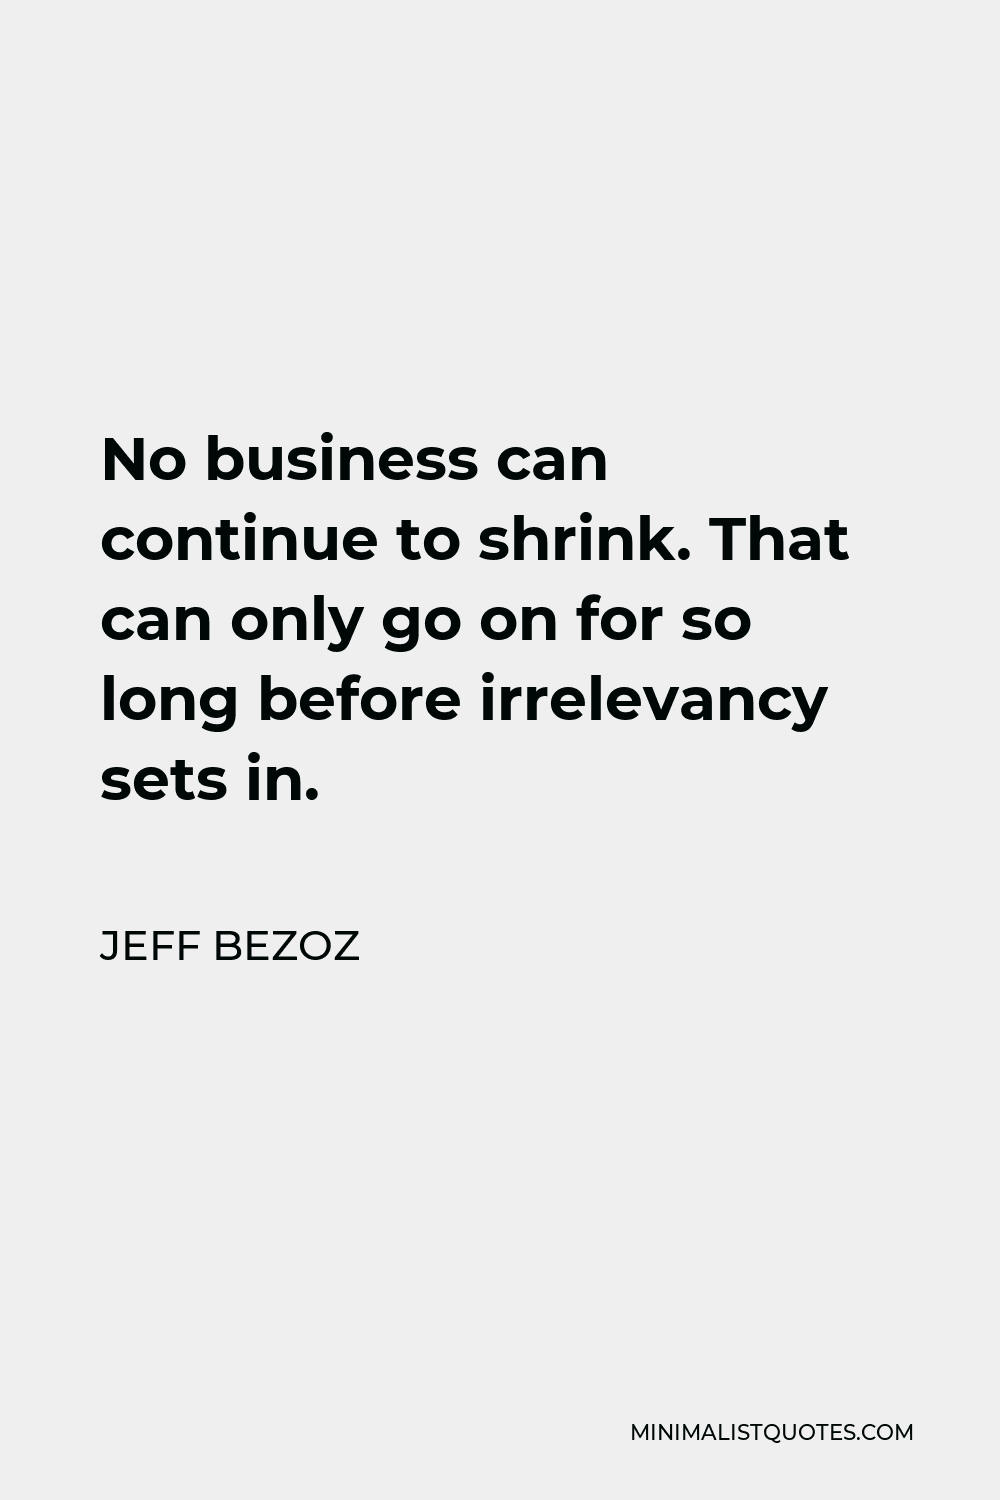 Jeff Bezoz Quote - No business can continue to shrink. That can only go on for so long before irrelevancy sets in.